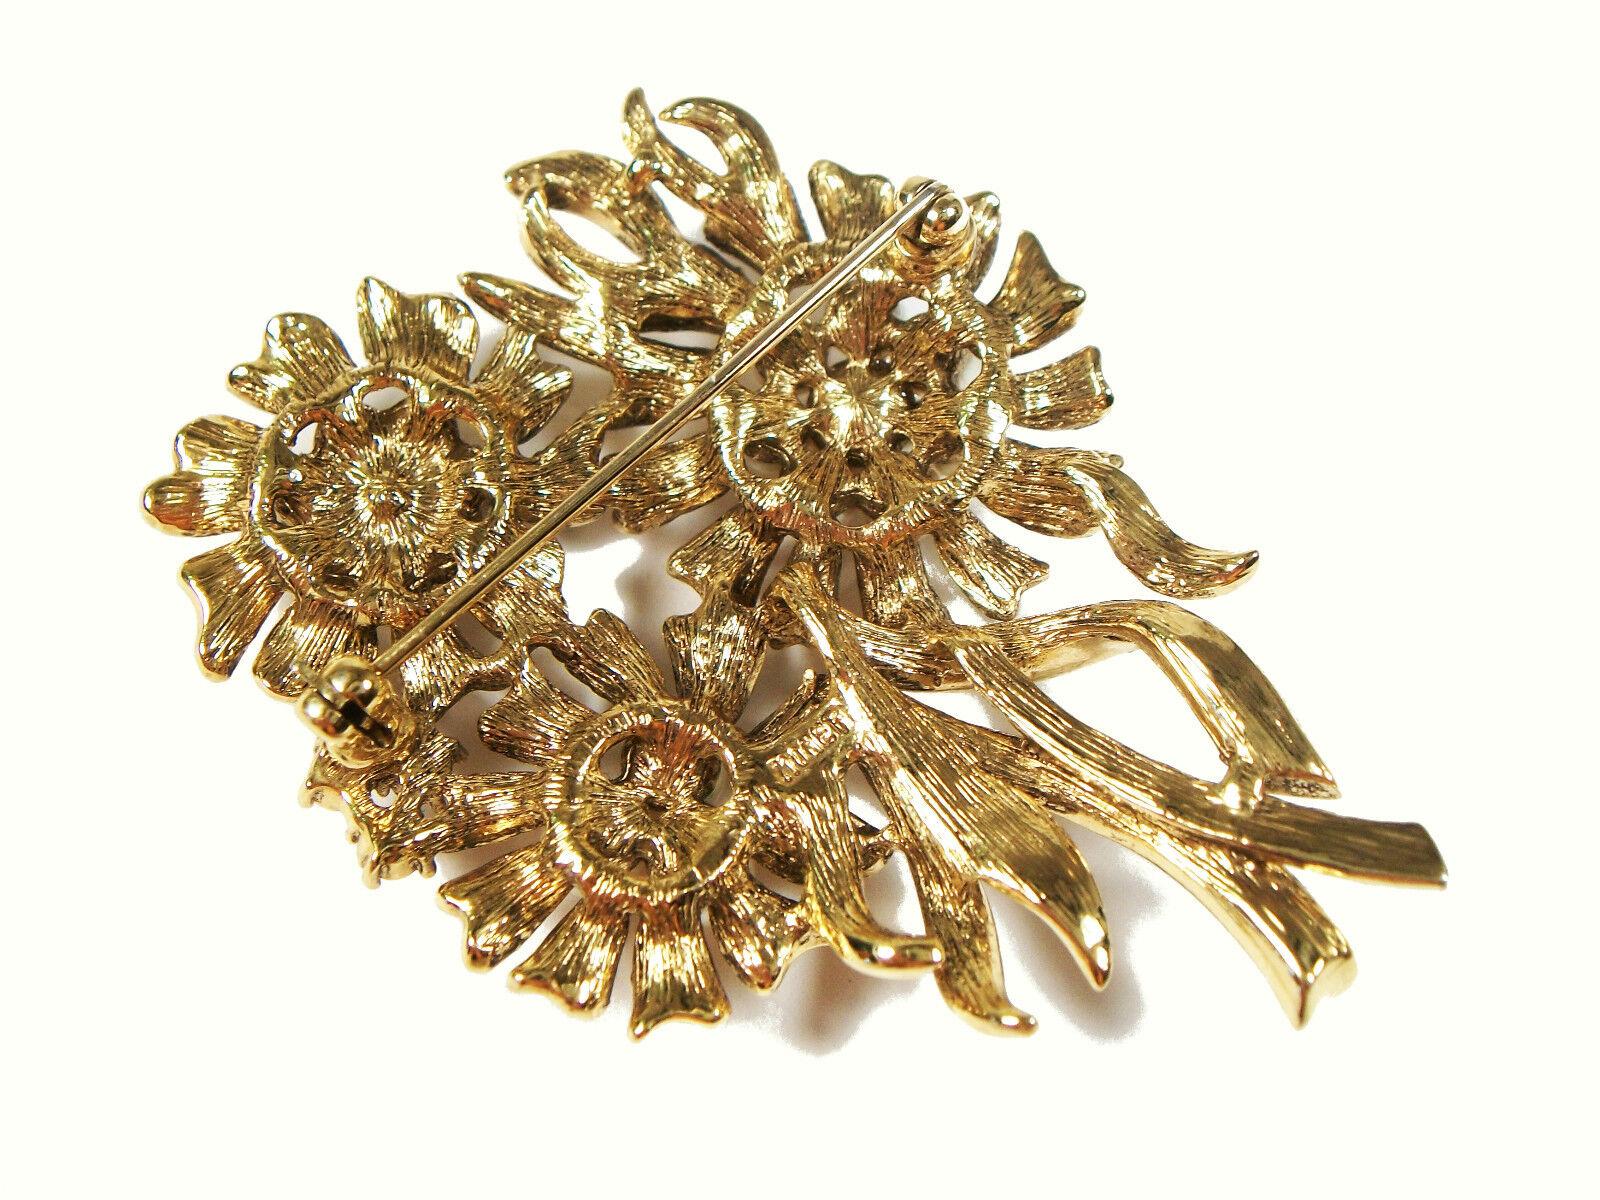 Women's MONET - Vintage Flower Brooch with Pearls & Rhinestones - Signed - Circa 1960's For Sale